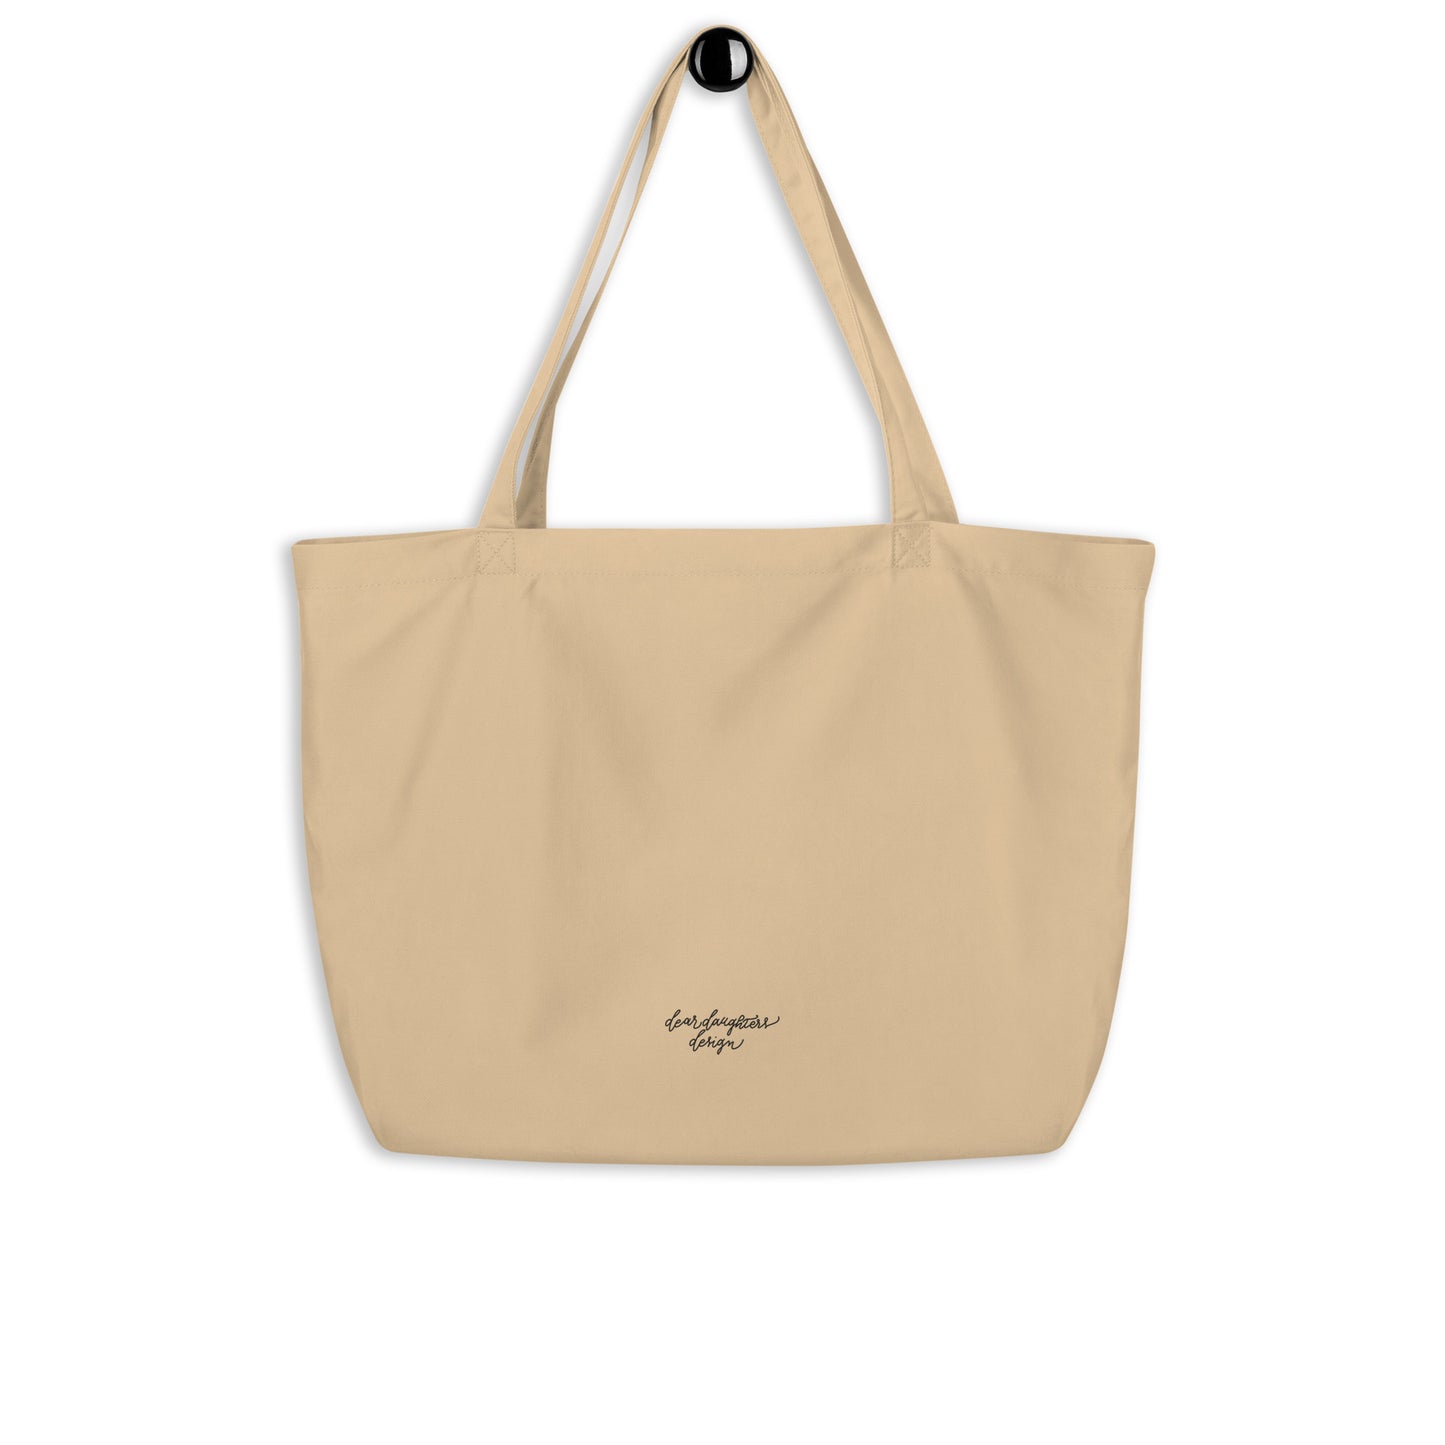 Script "Mama" Calligraphy Printed on Certified Organic Cotton Canvas Large Eco Tote Bag